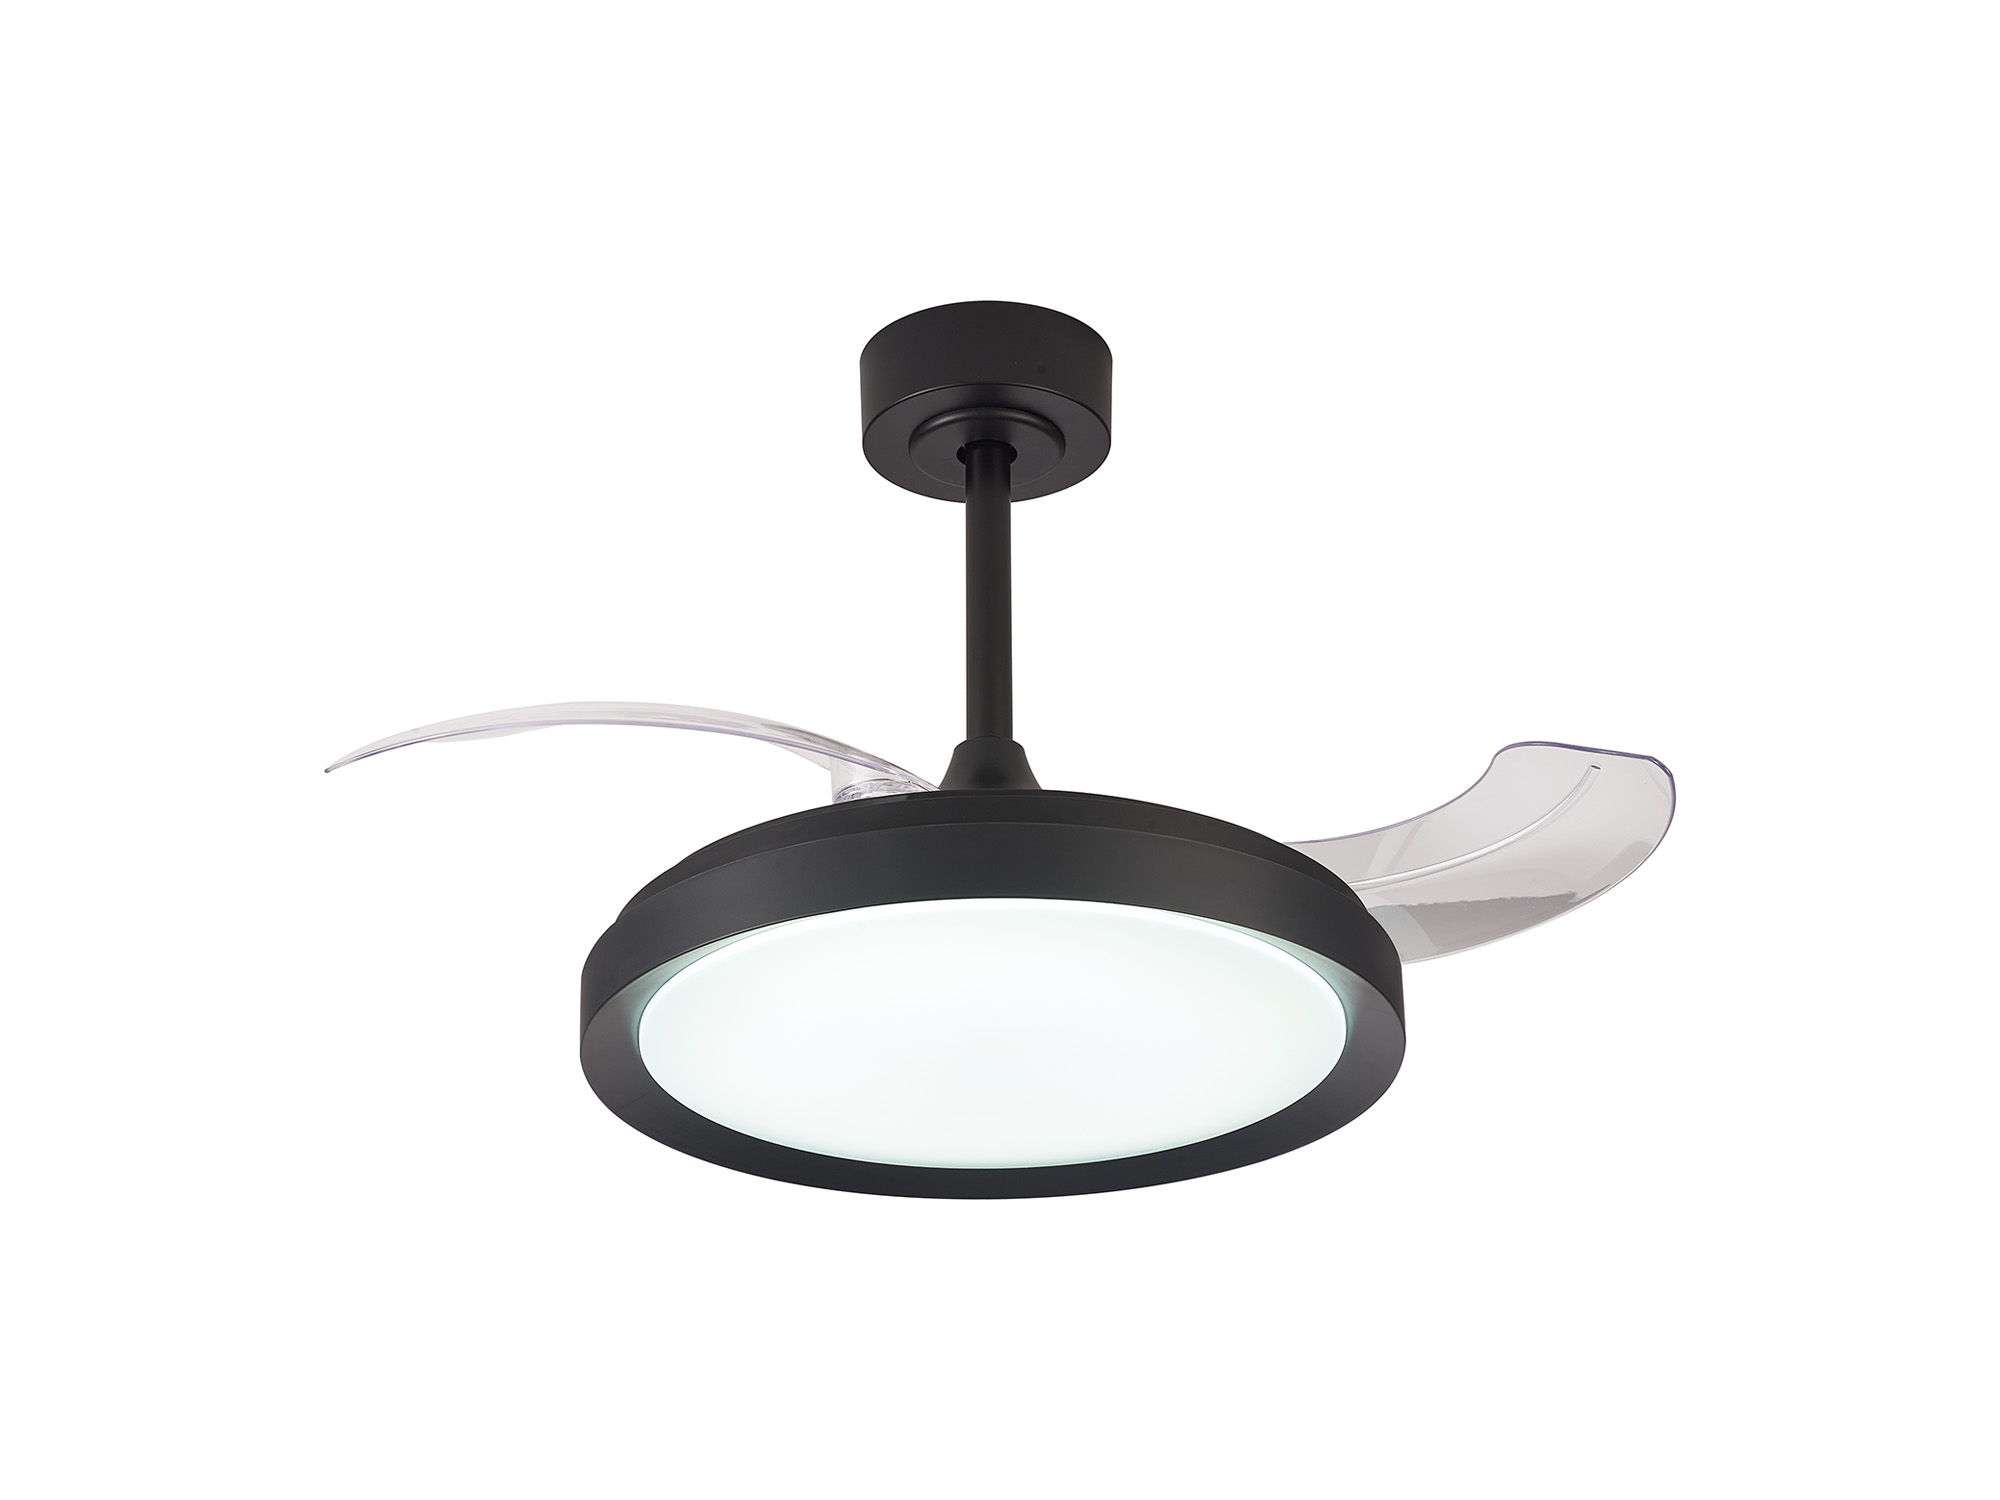 M8831  Mistral Mini 40W LED Dimmable Ceiling Light With Built-In 28W DC Fan, 2700-5000K Remote Control, Black